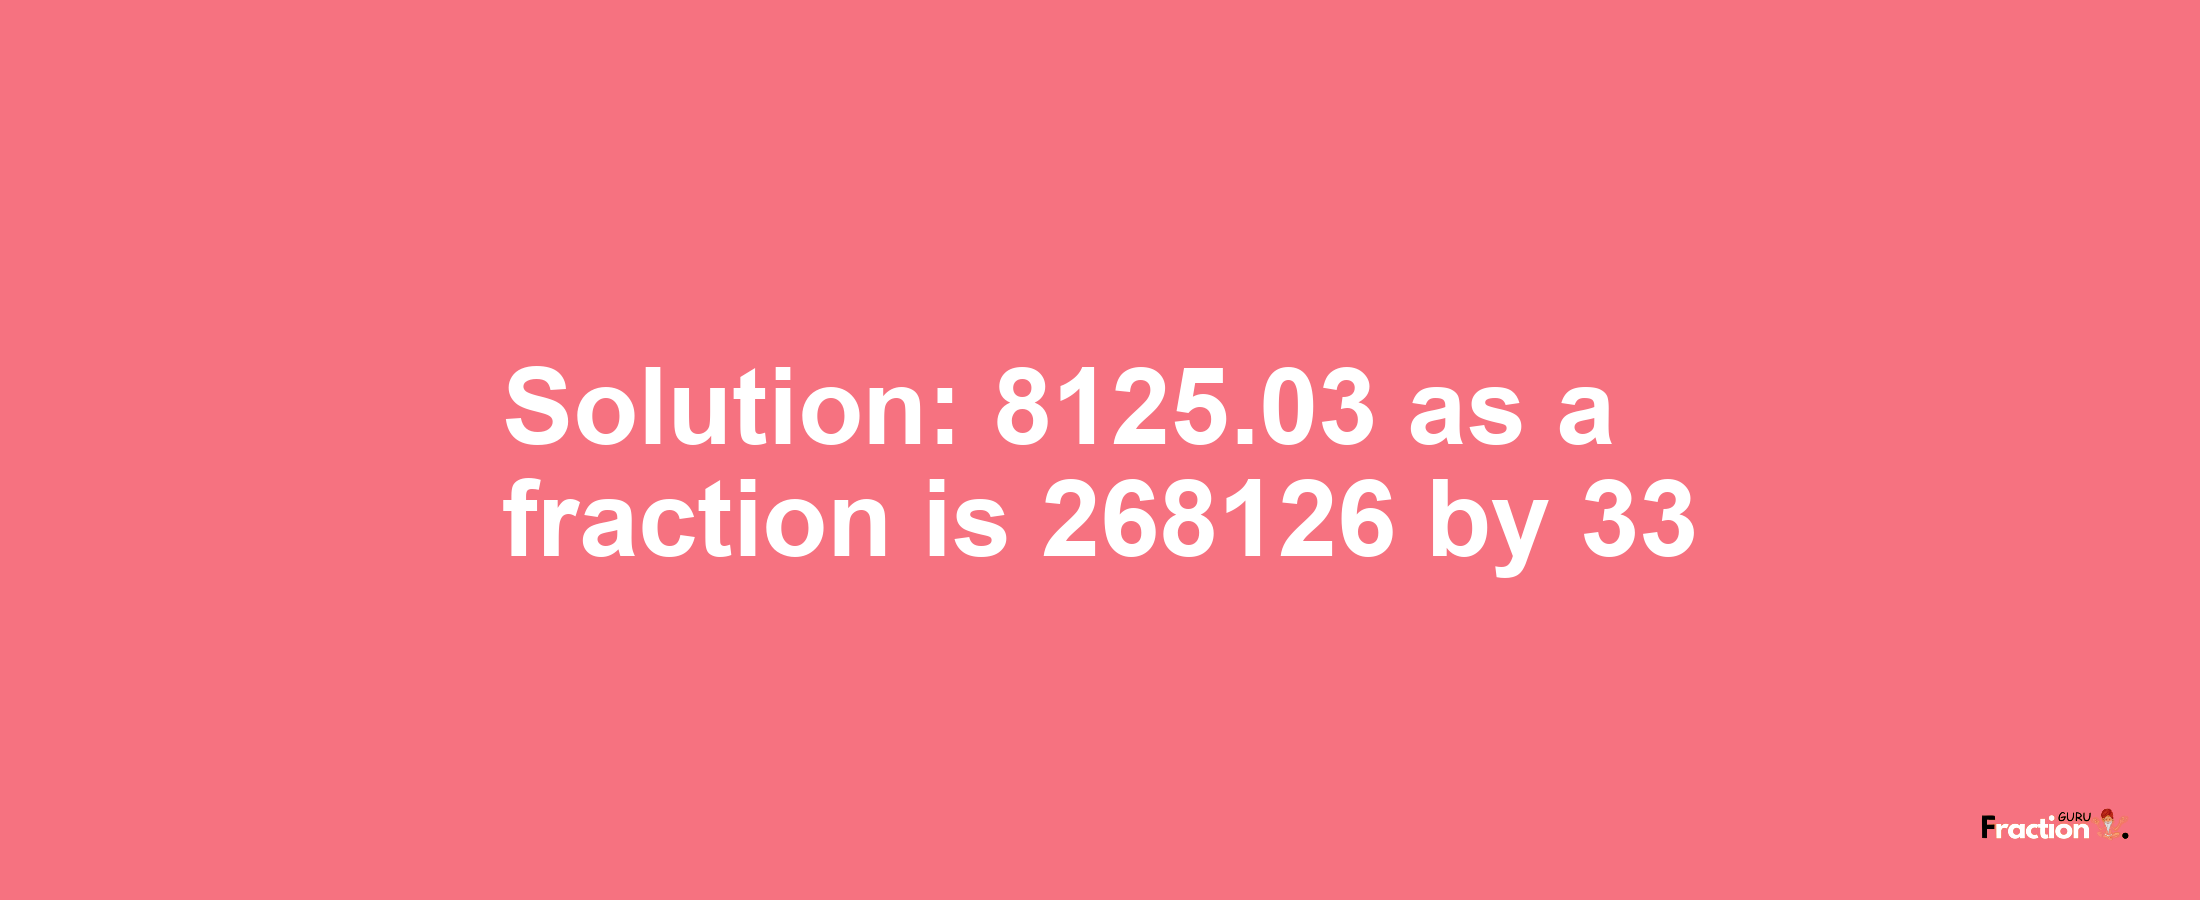 Solution:8125.03 as a fraction is 268126/33